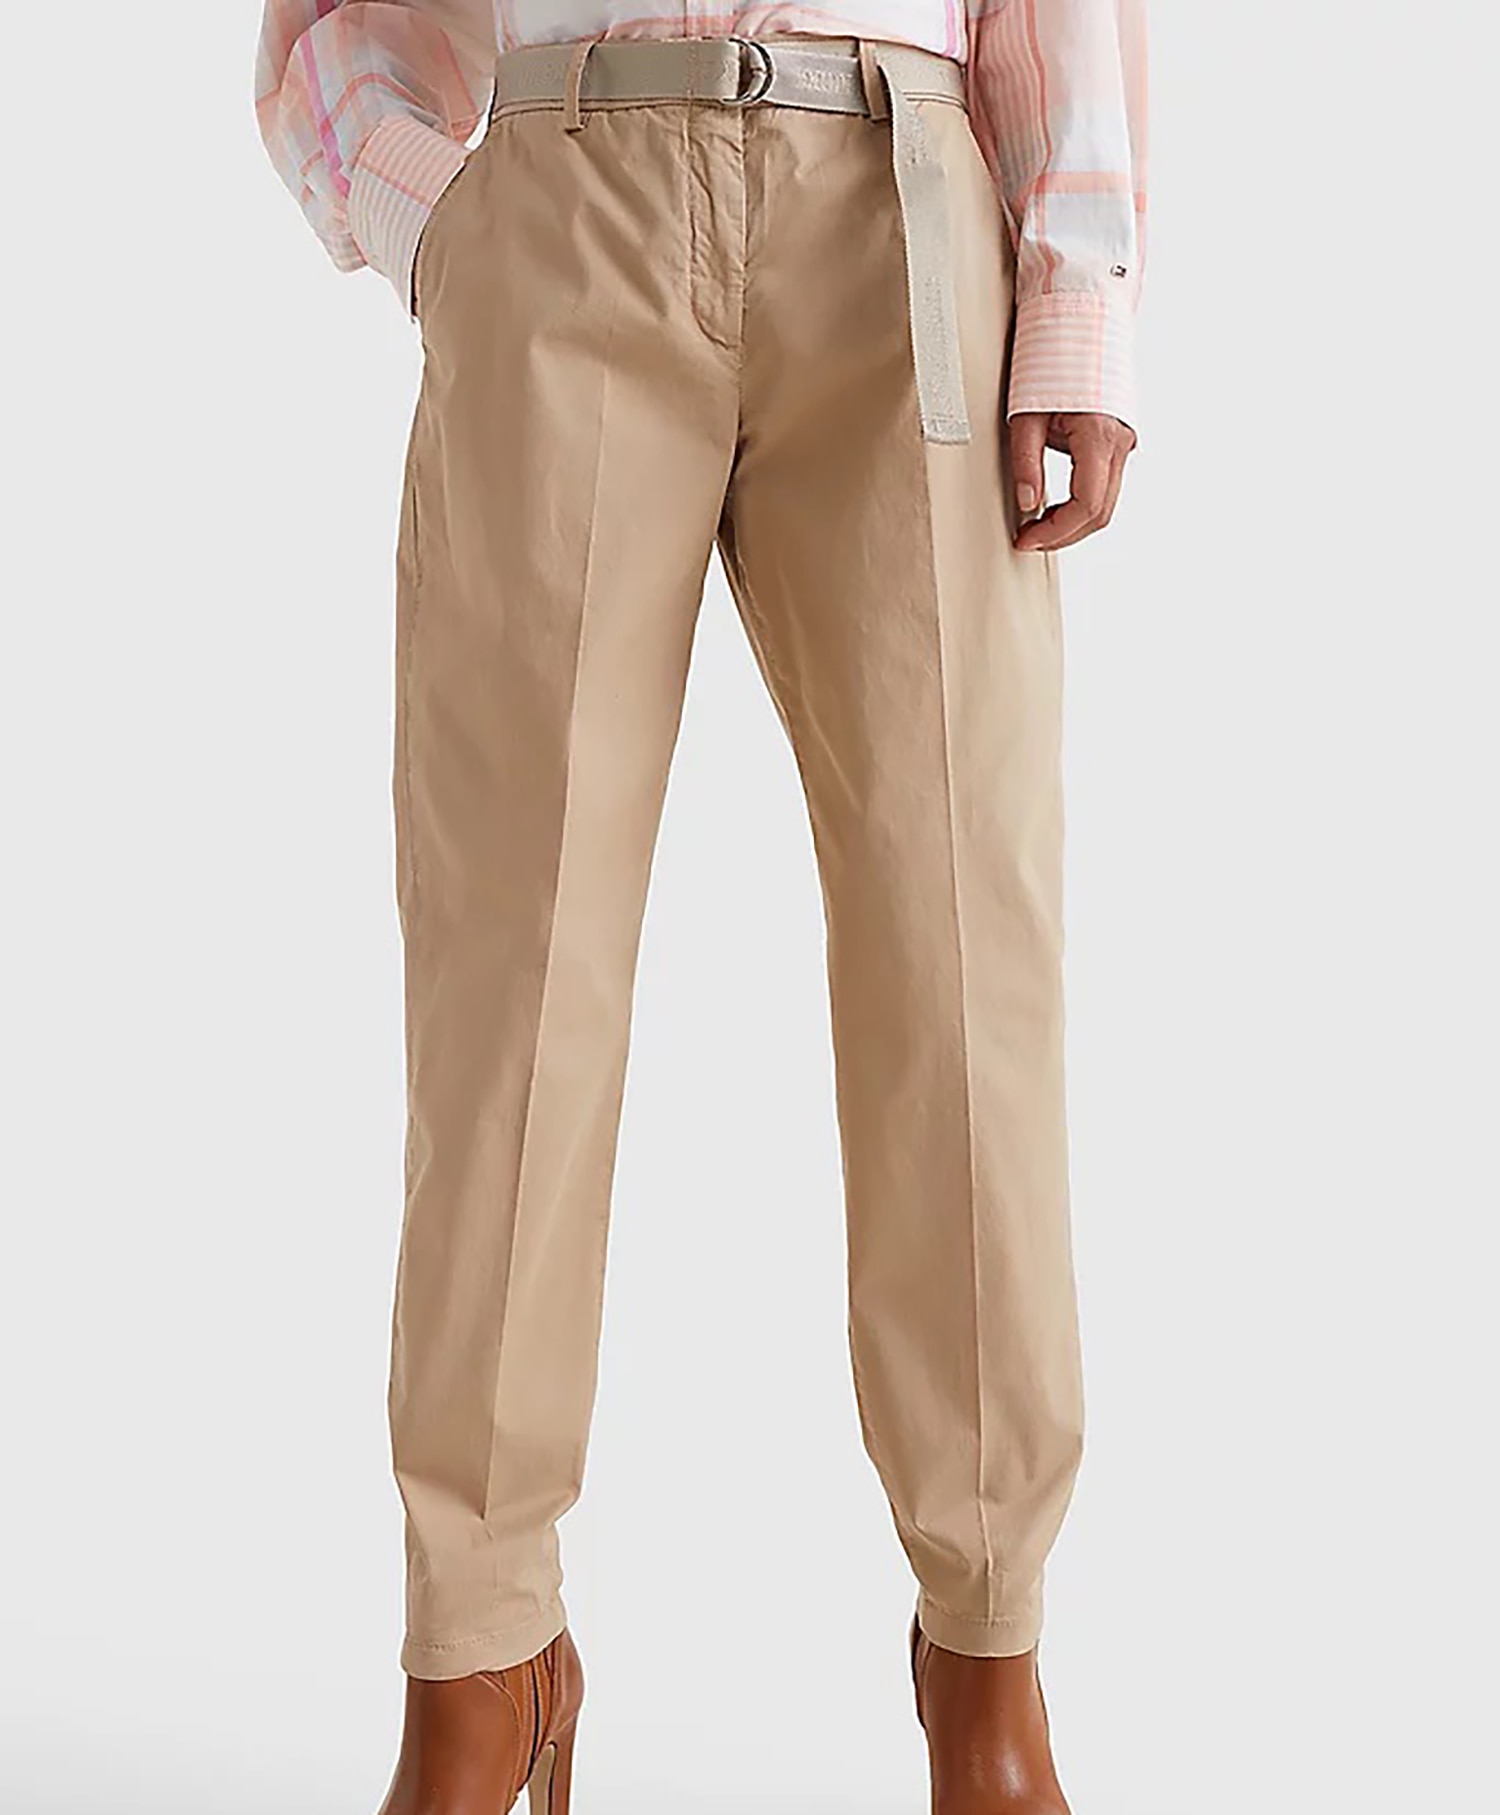 Hilfiger Michelle Tapered Pant